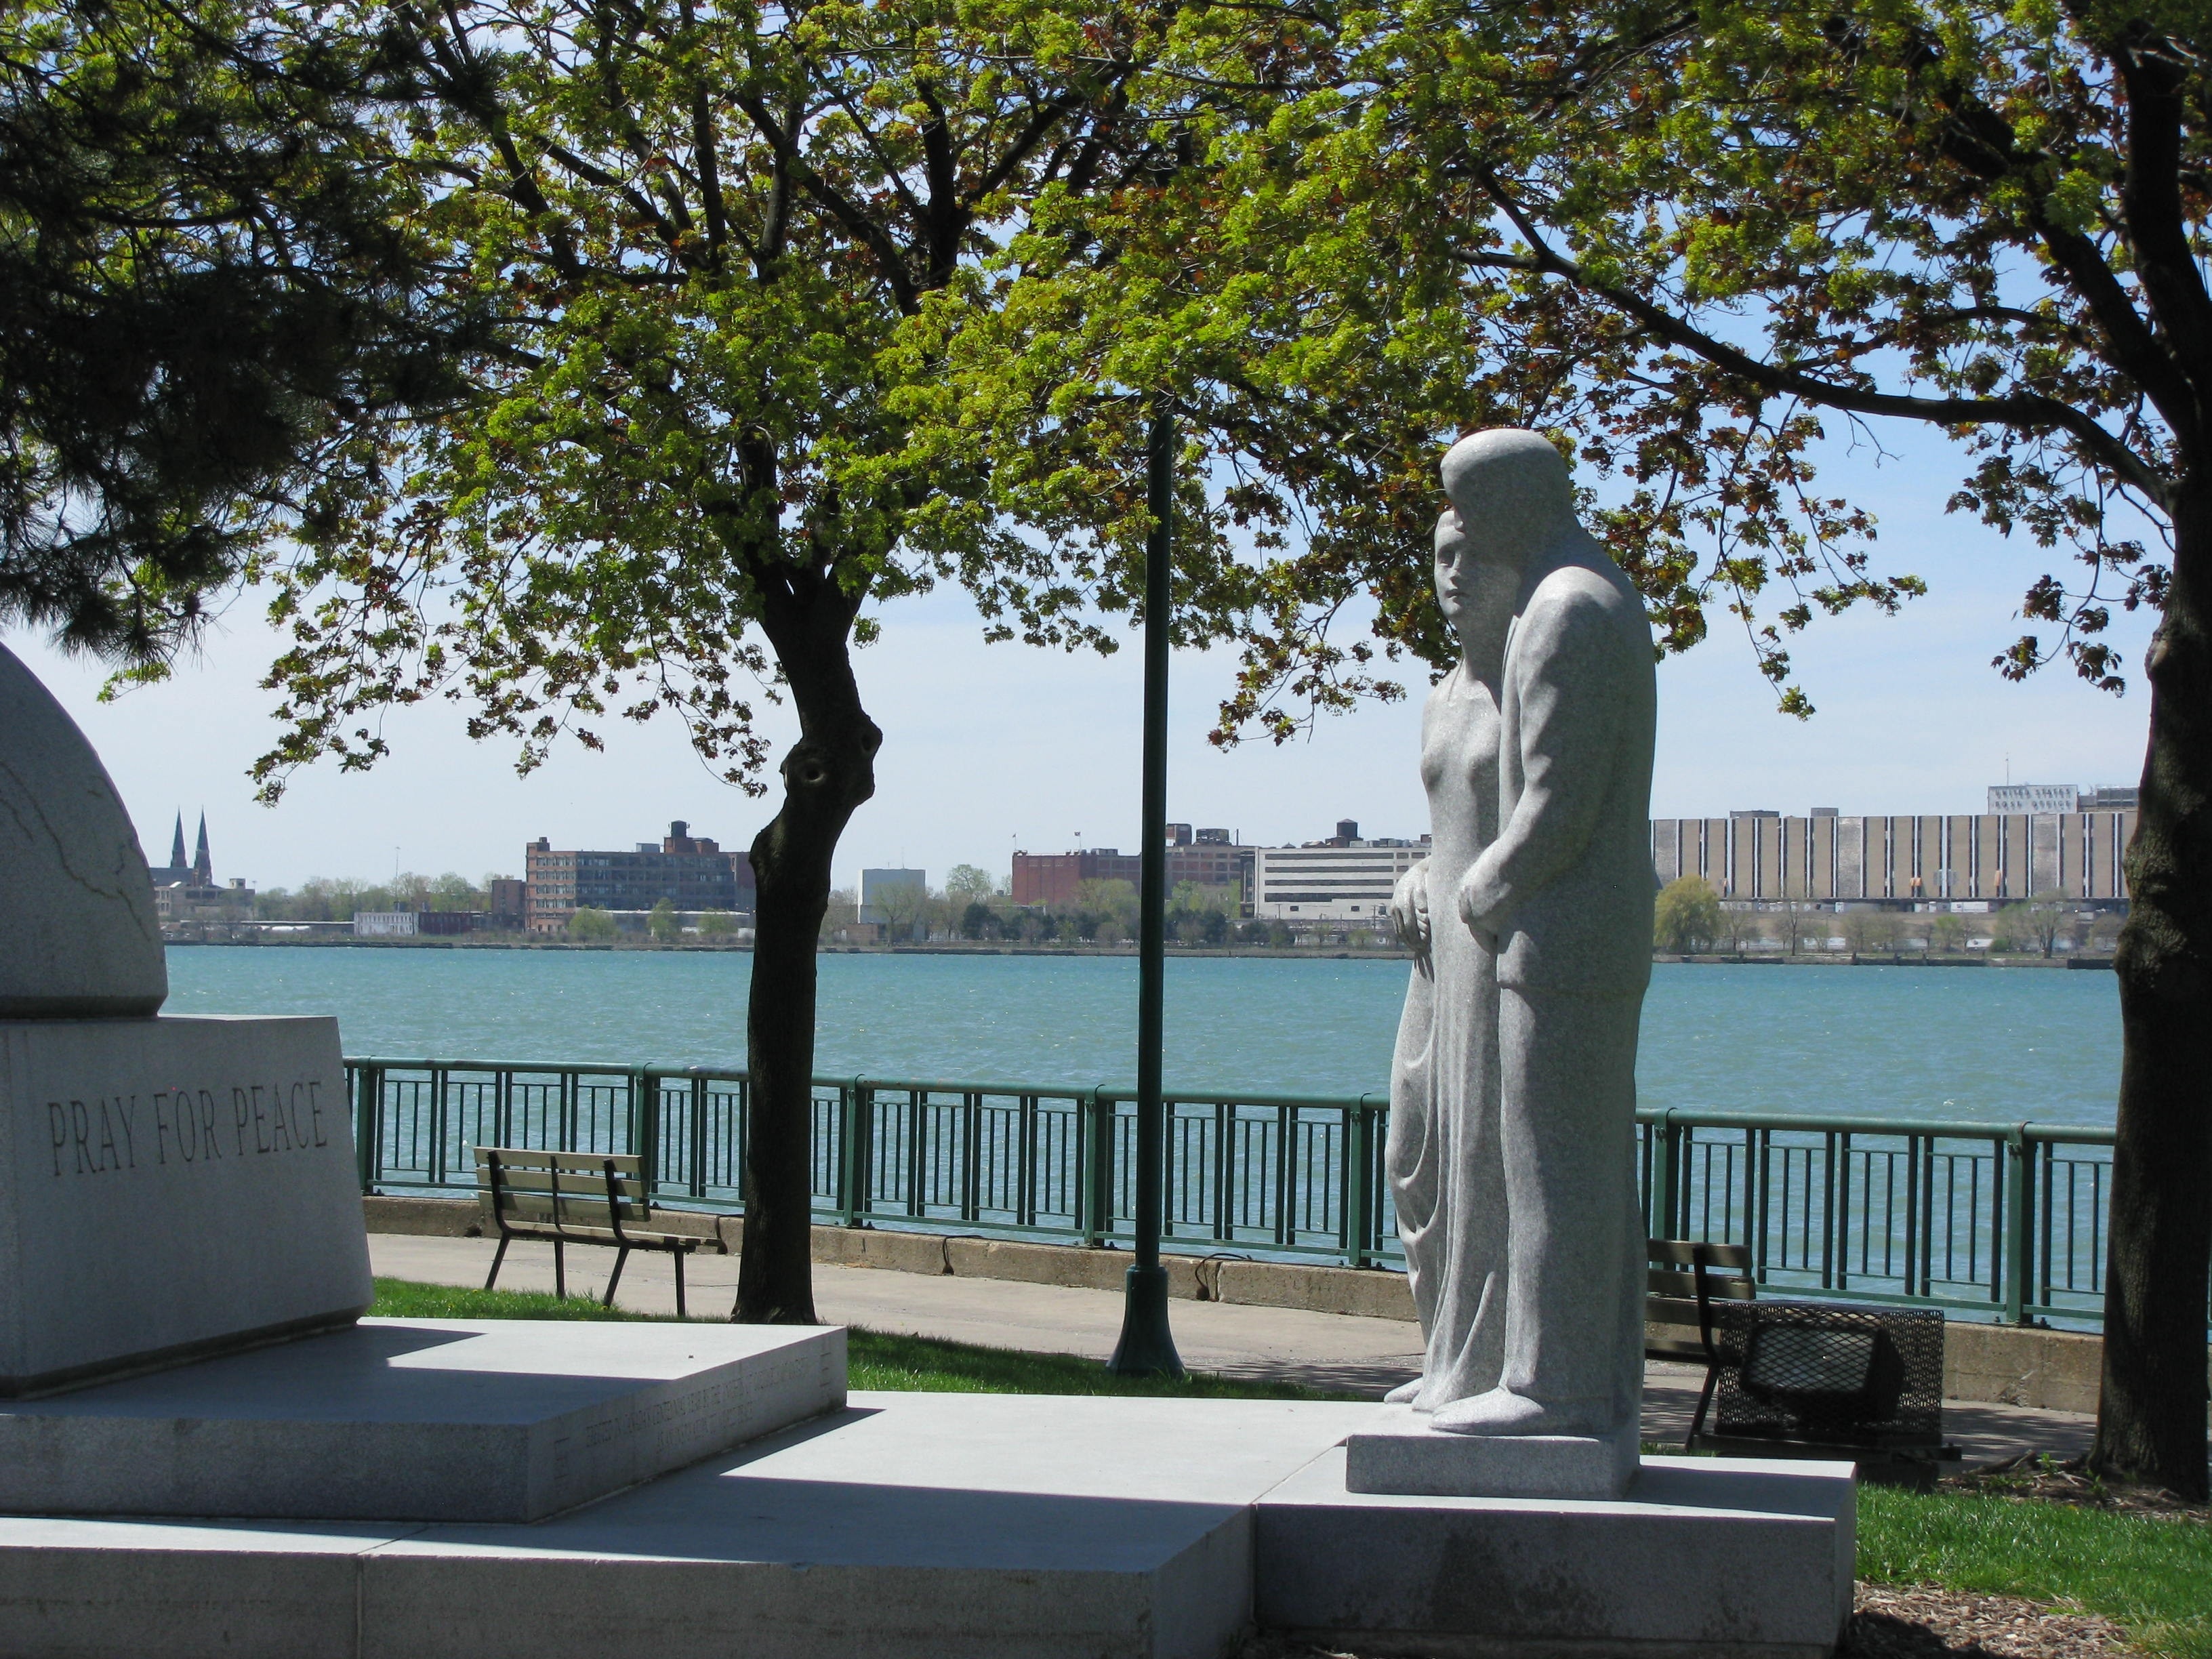 2 statues near body of water at daytime